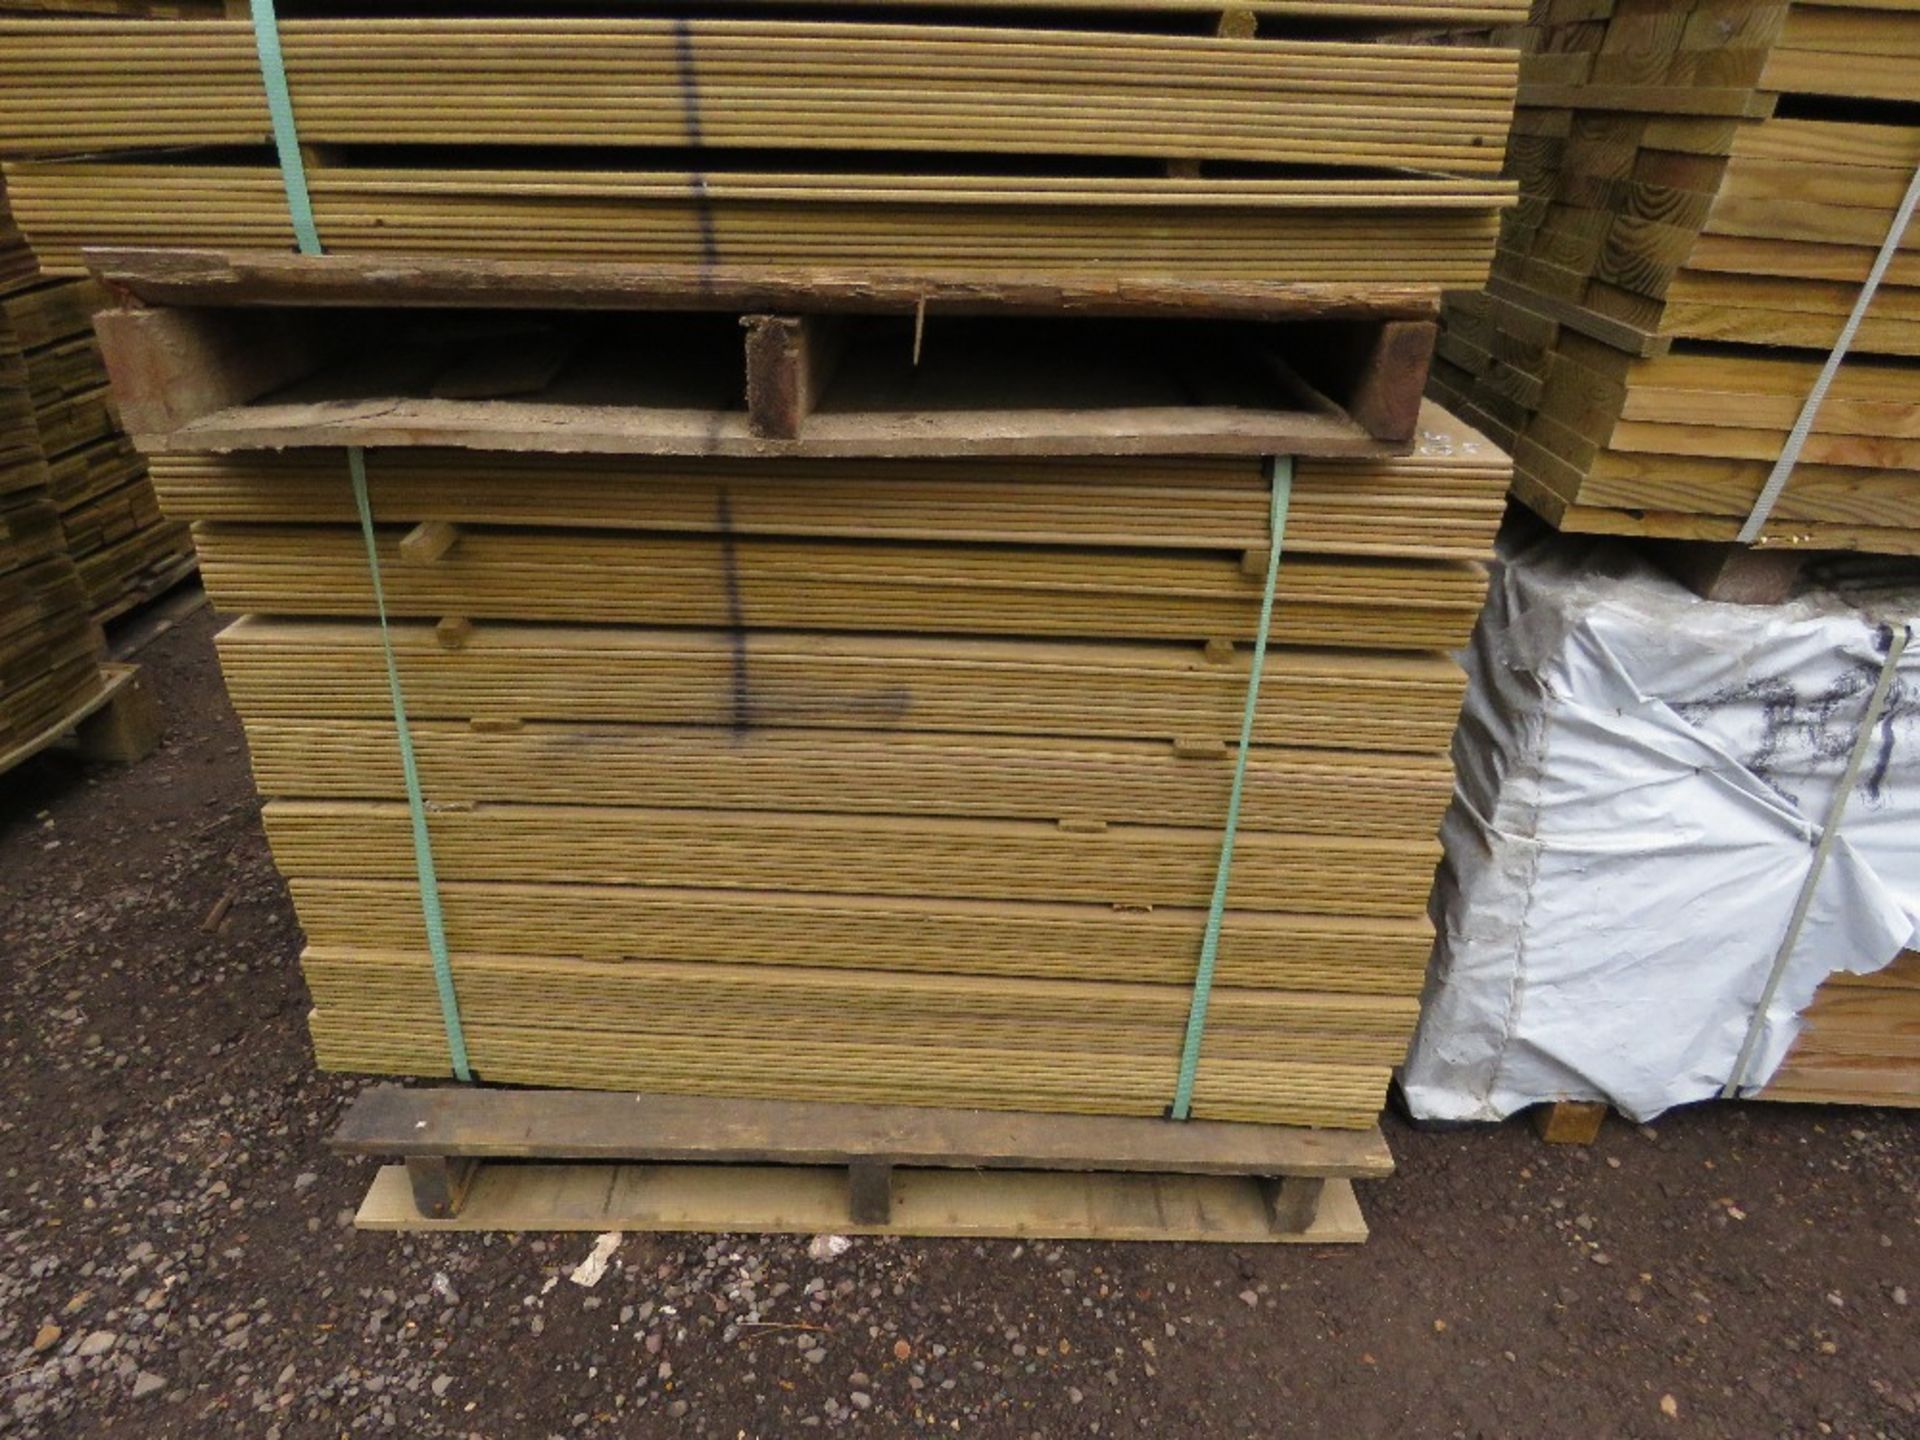 2 X PALLETS OF TREATED HIT AND MISS FENCE CLADDING BOARDS 1.04M LENGTH X 100MM WIDTH APPROX. - Image 4 of 6